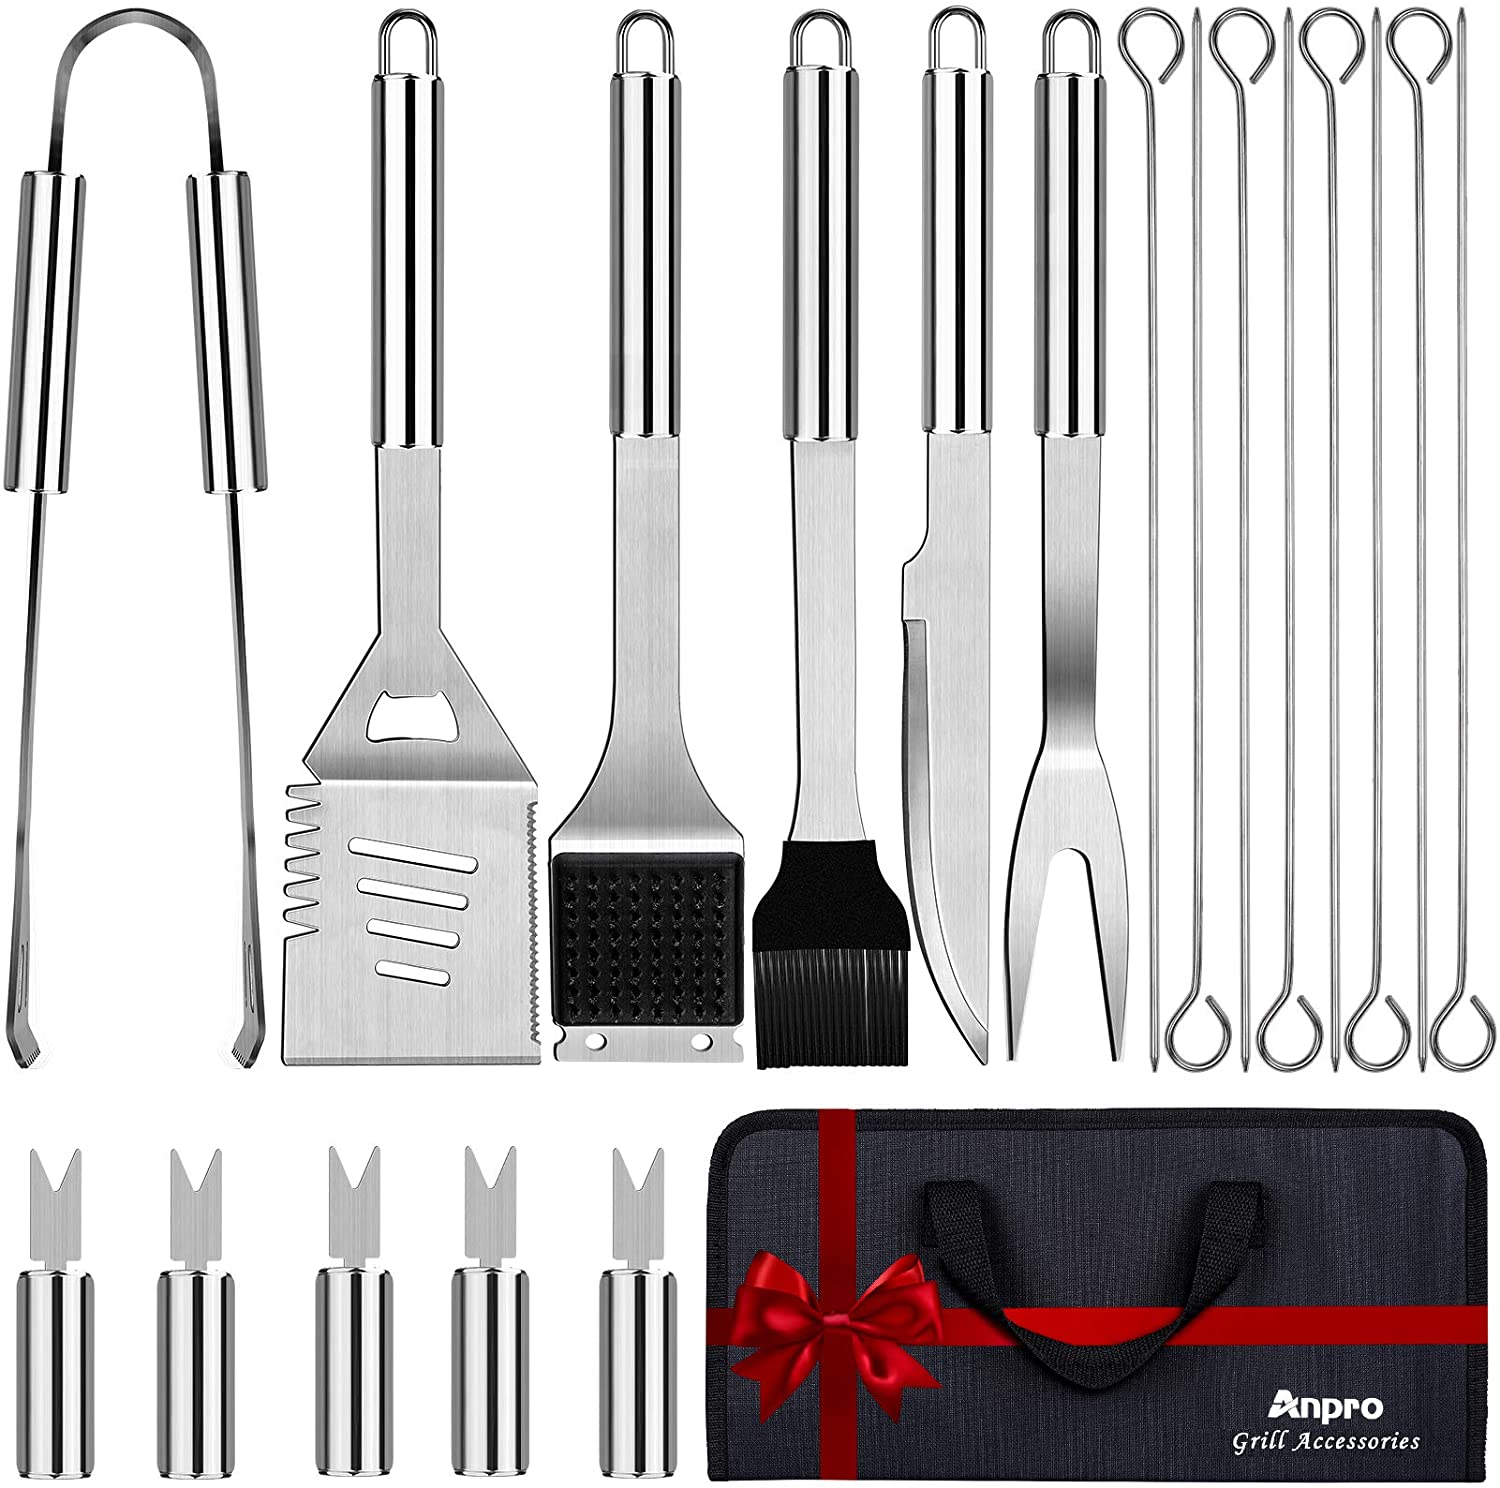 Anpro Stainless Steel Barbecue Tool Set, 21-Piece